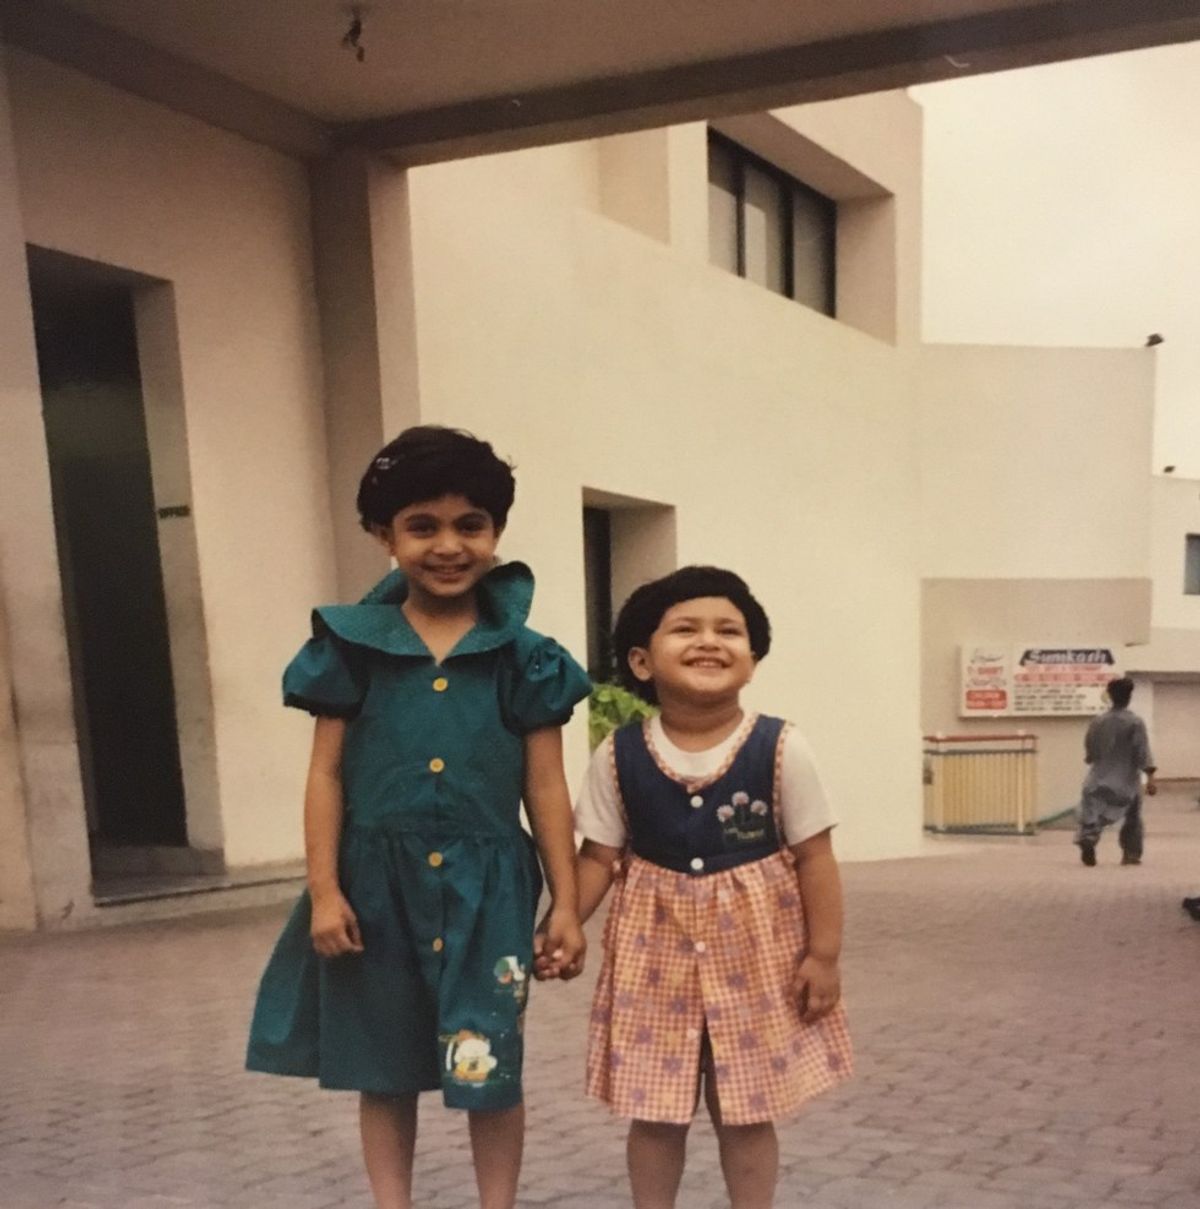 11 Things I Learned From My Sister